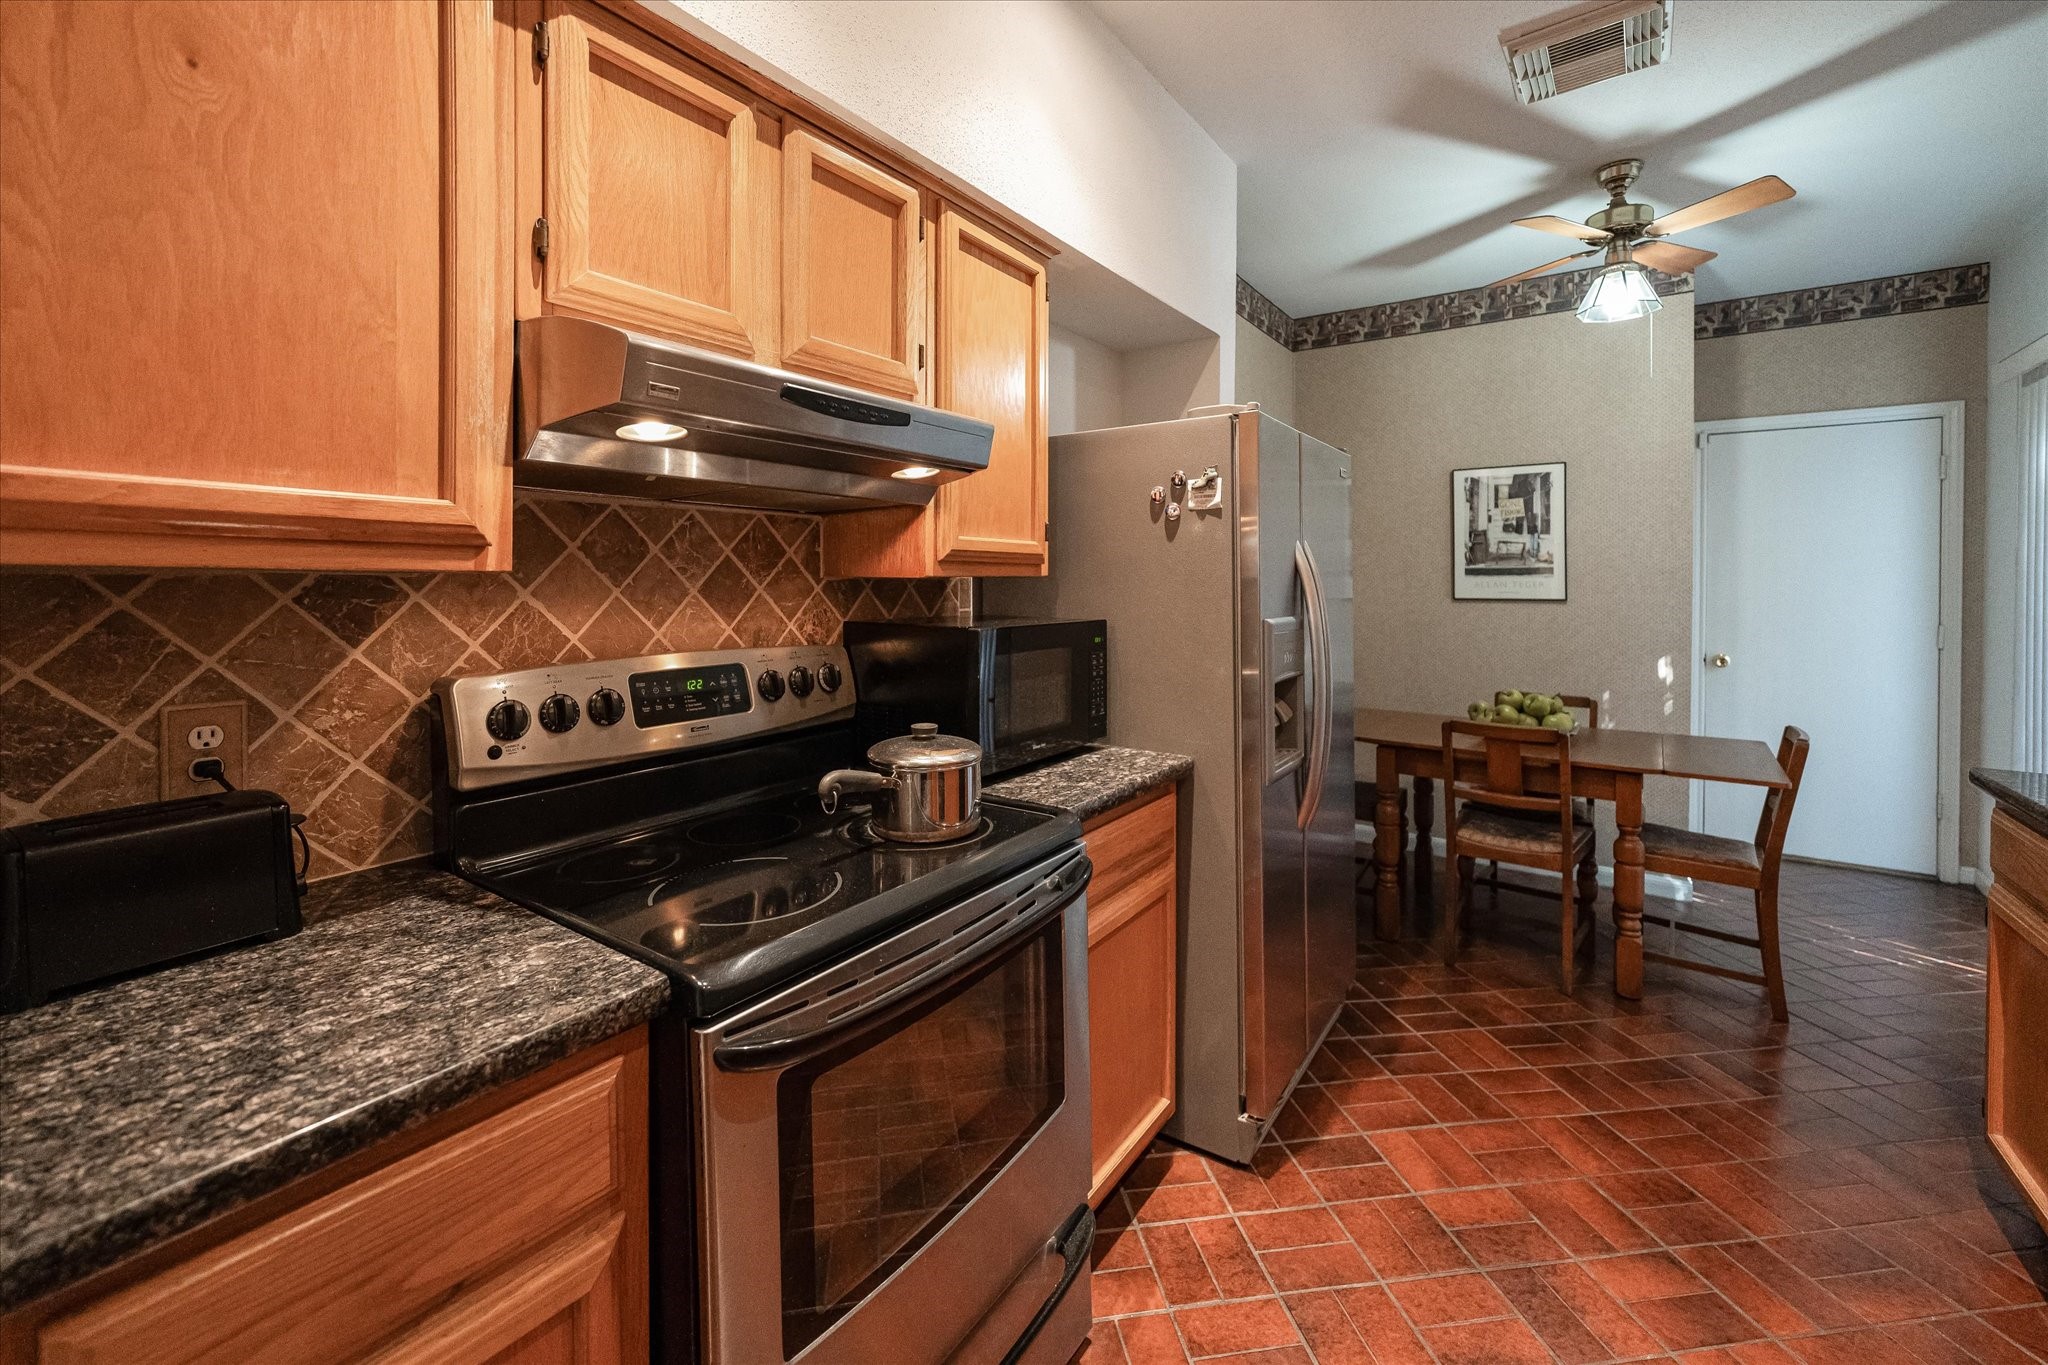 Diving in closer to your kitchen, overlooking the breakfast area. This space is gorgeous and comes equipped with stainless steel appliances, granite counter tops, beautiful cabinetry, and tile flooring.